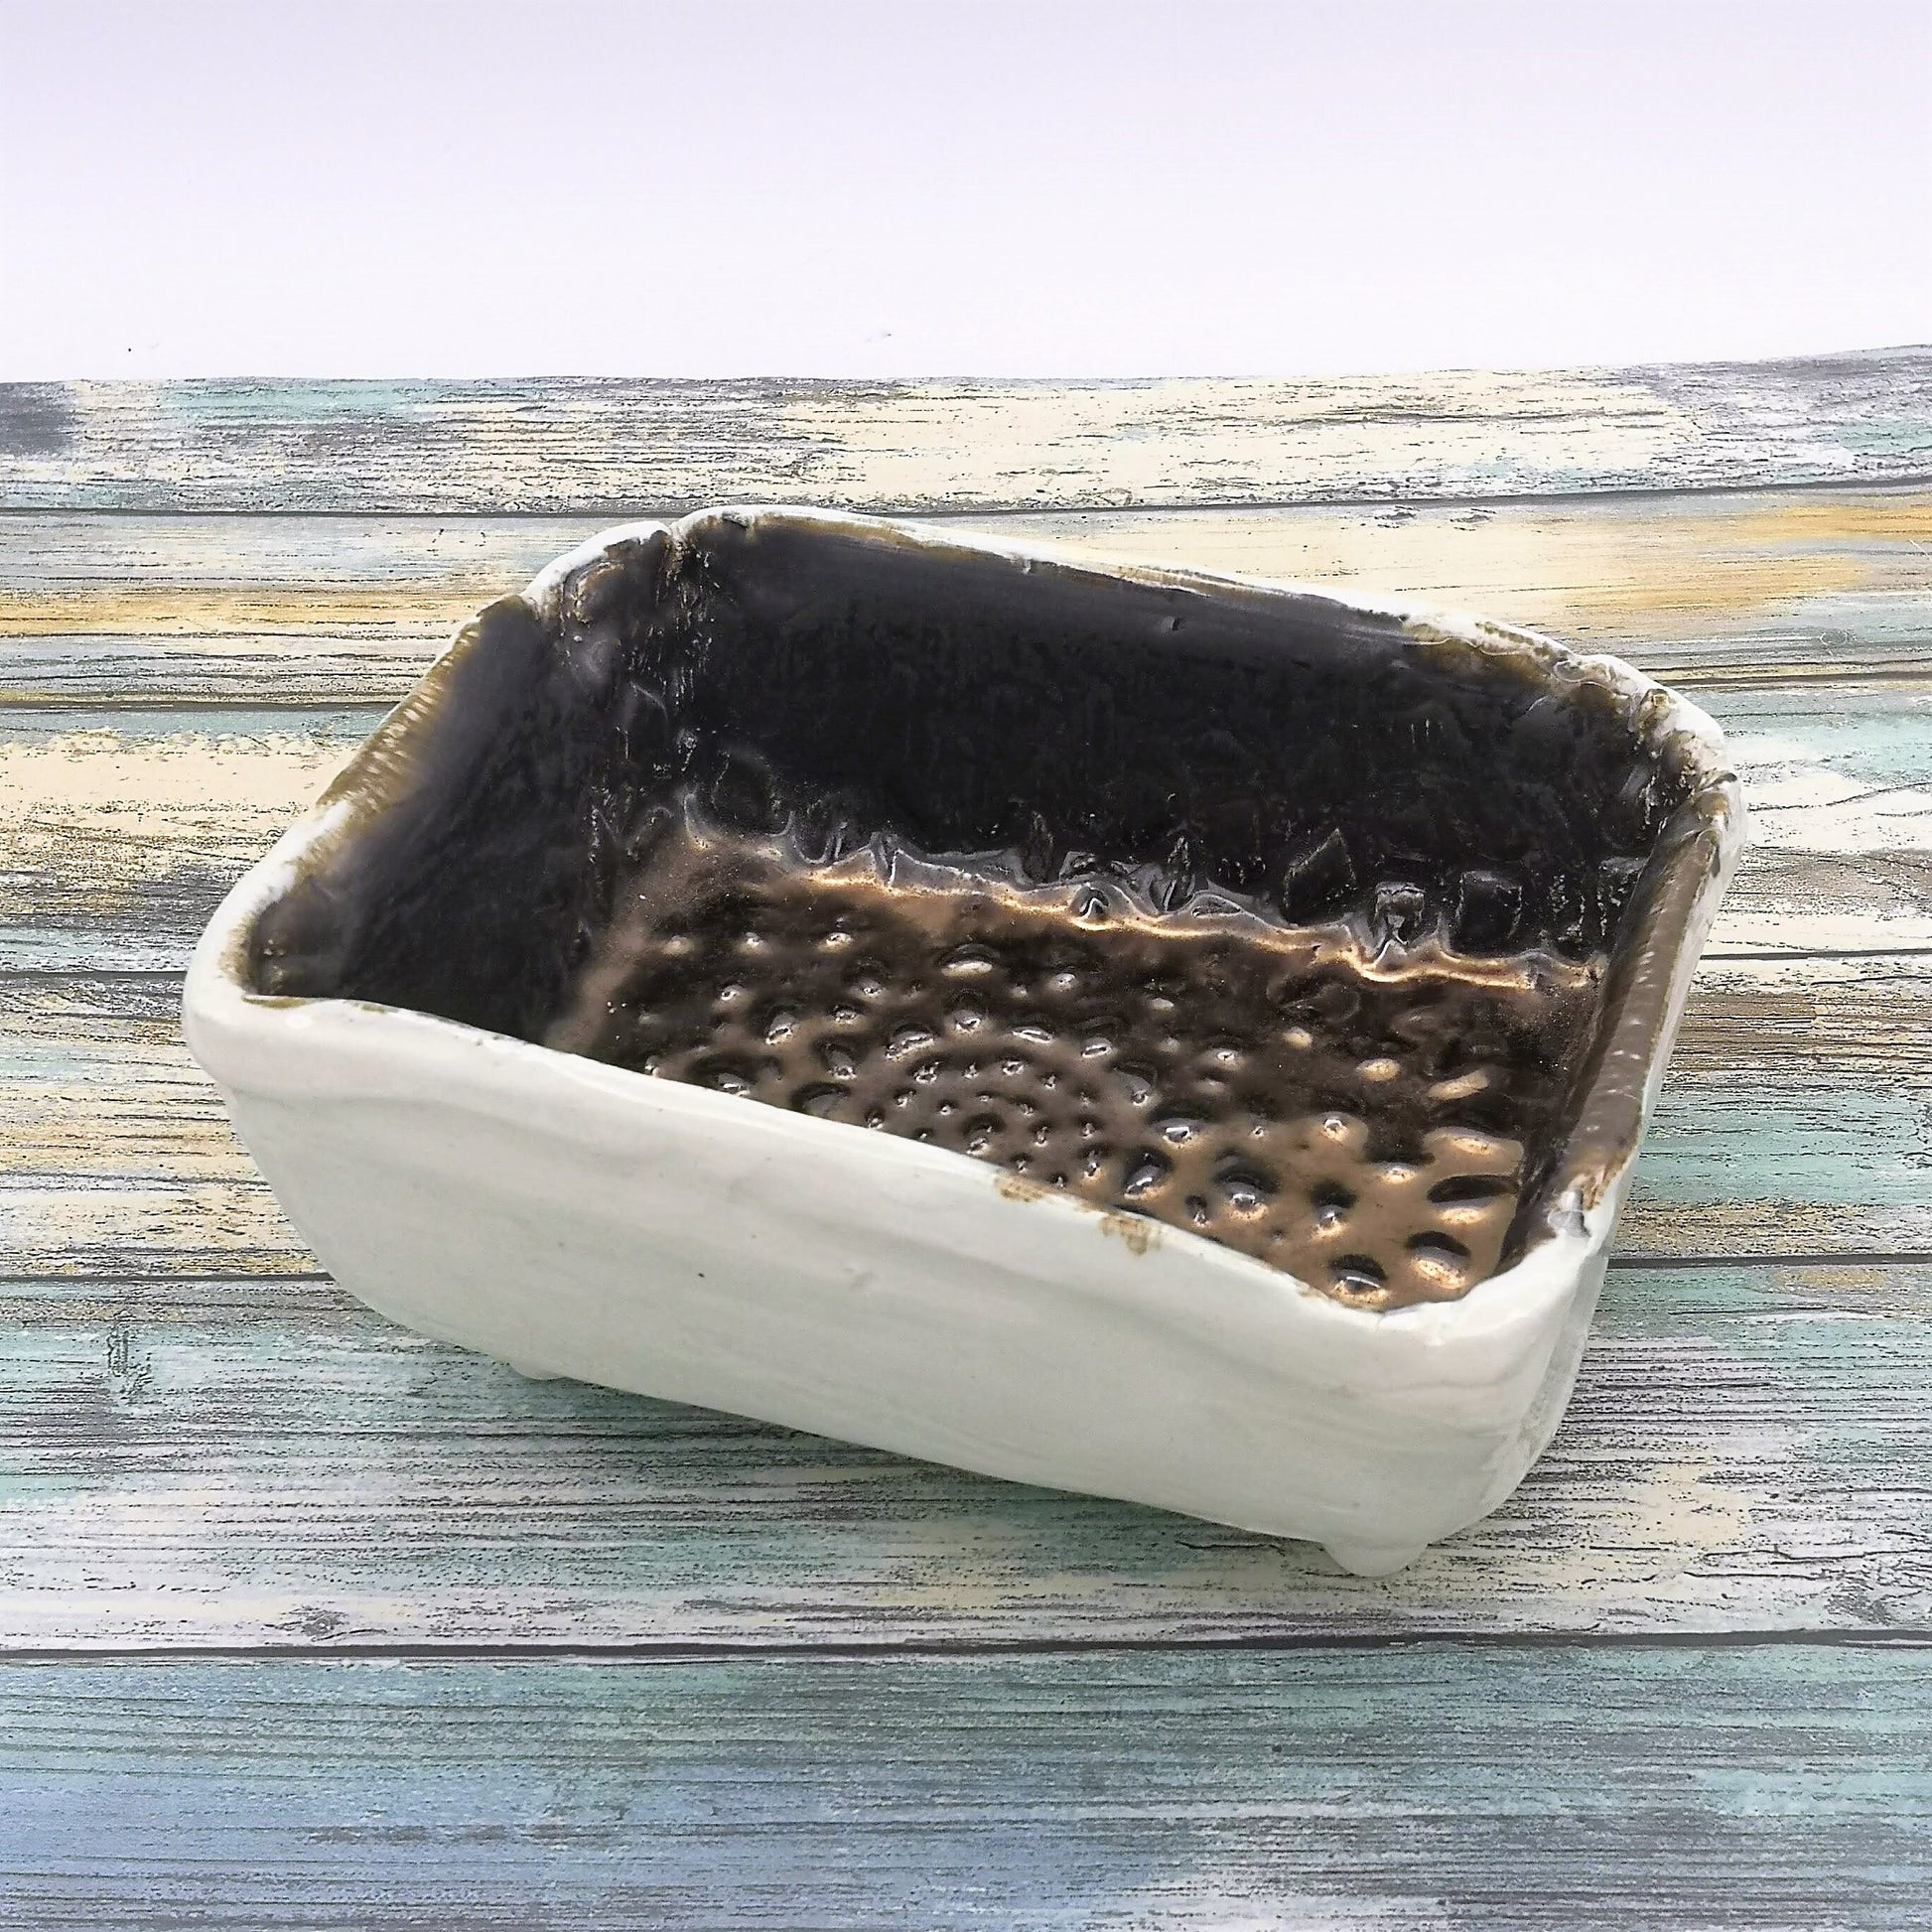 Handmade Ceramic Decorative Key Bowl, Mothers Day Gift From Daughter, Gift For Women Who Has Everything, Mom Birthday Gift Trending Now - Ceramica Ana Rafael